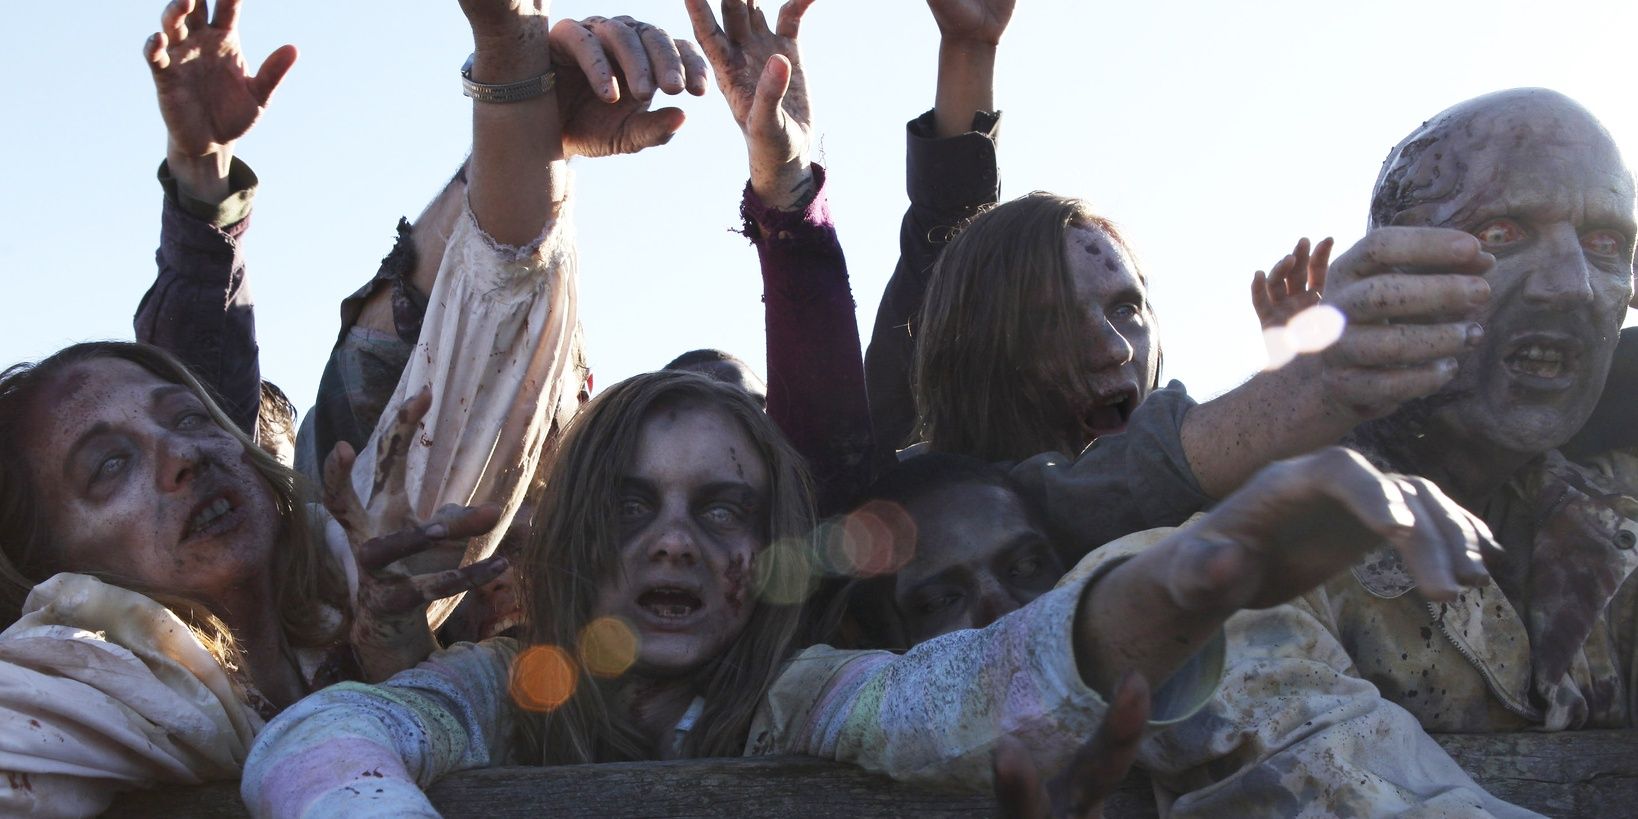 10 Endearing Behind The Scenes Facts About The Walking Dead